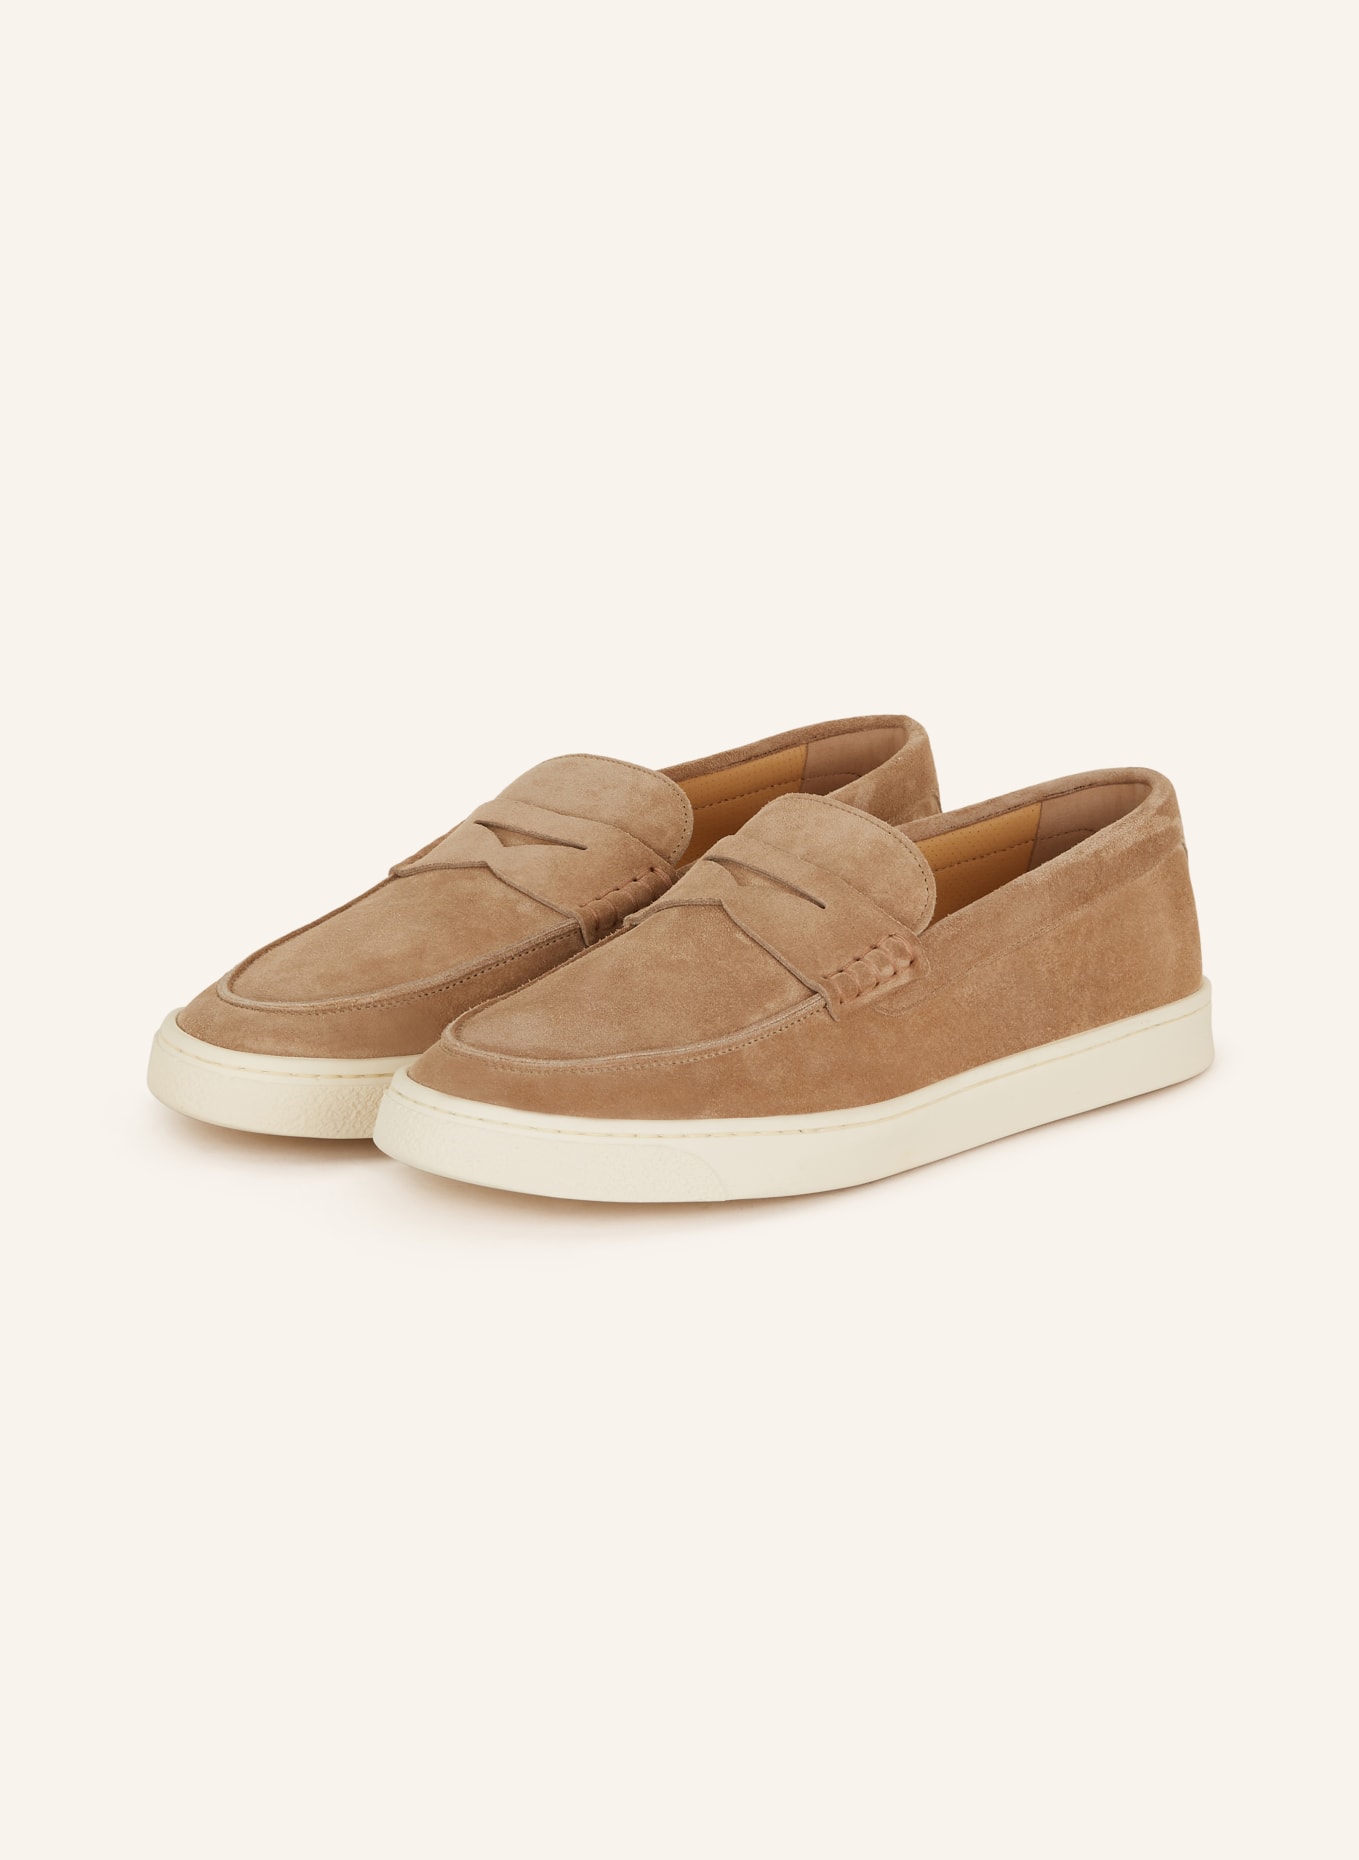 Brunello Cucinelli suede penny loafers - Neutrals